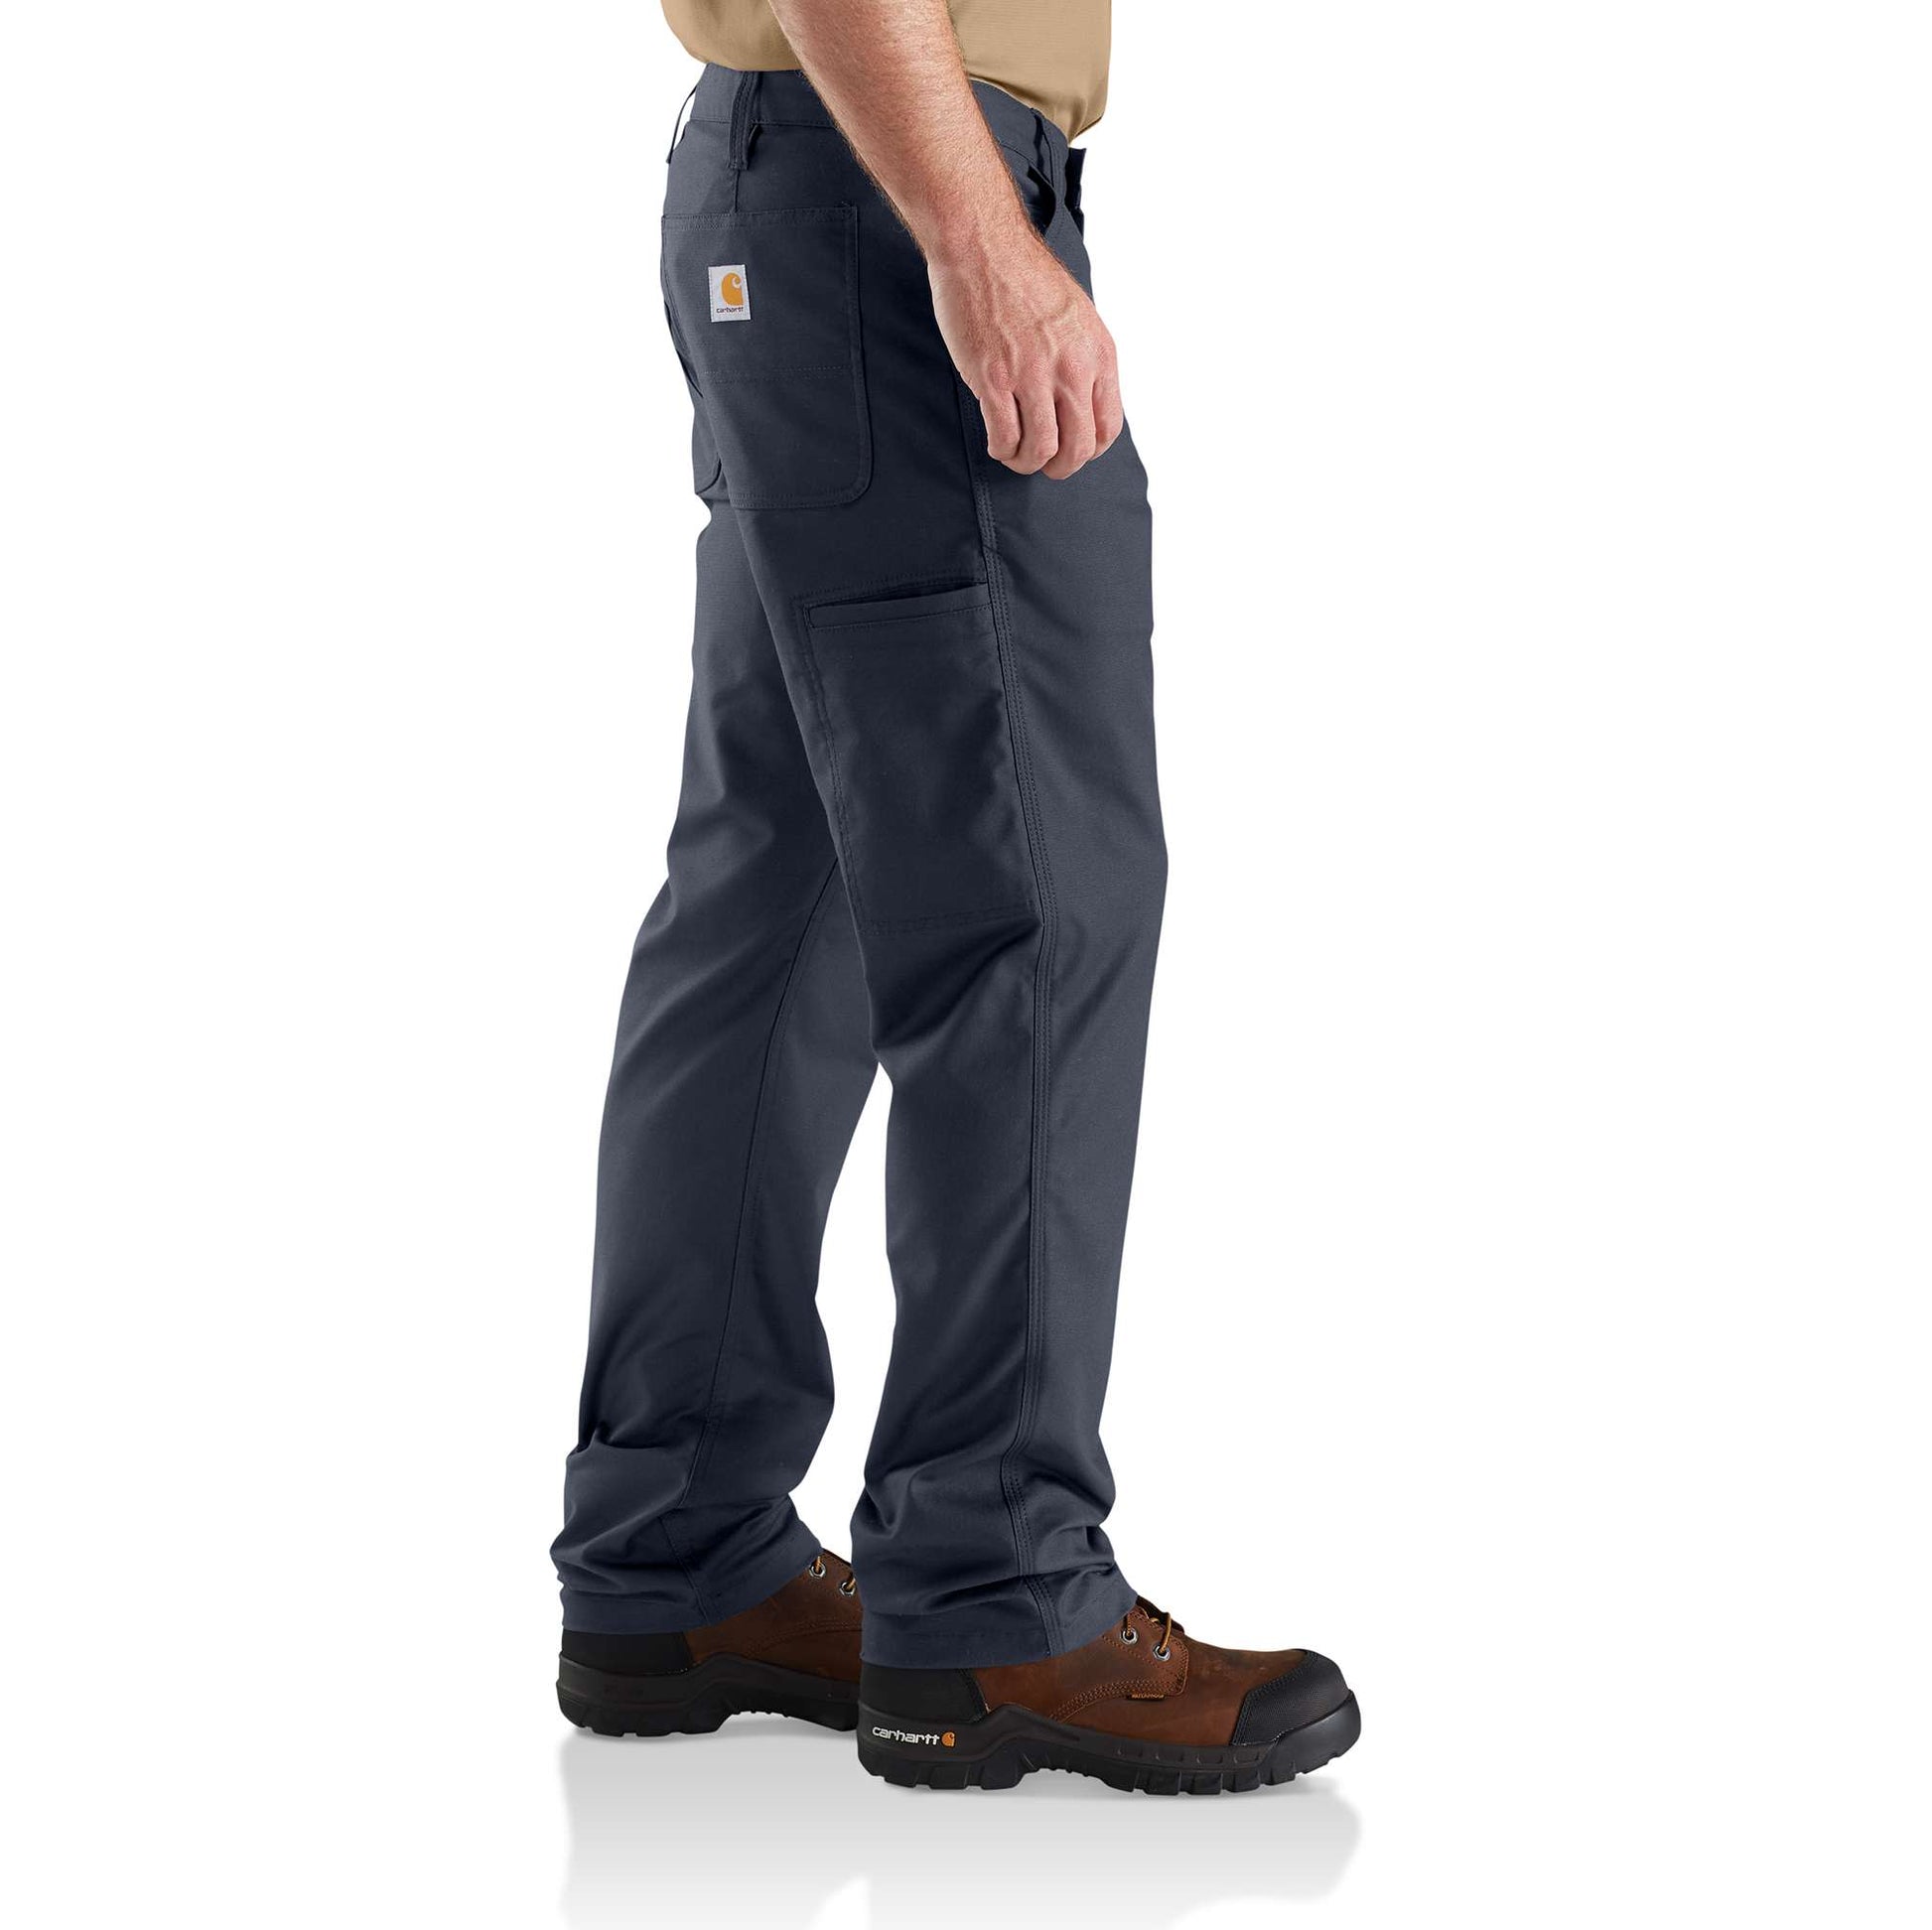 Carhartt Mens Navy Color 29x30 Rugged Flex Loose Fit Canvas Work Pants  BN0151 